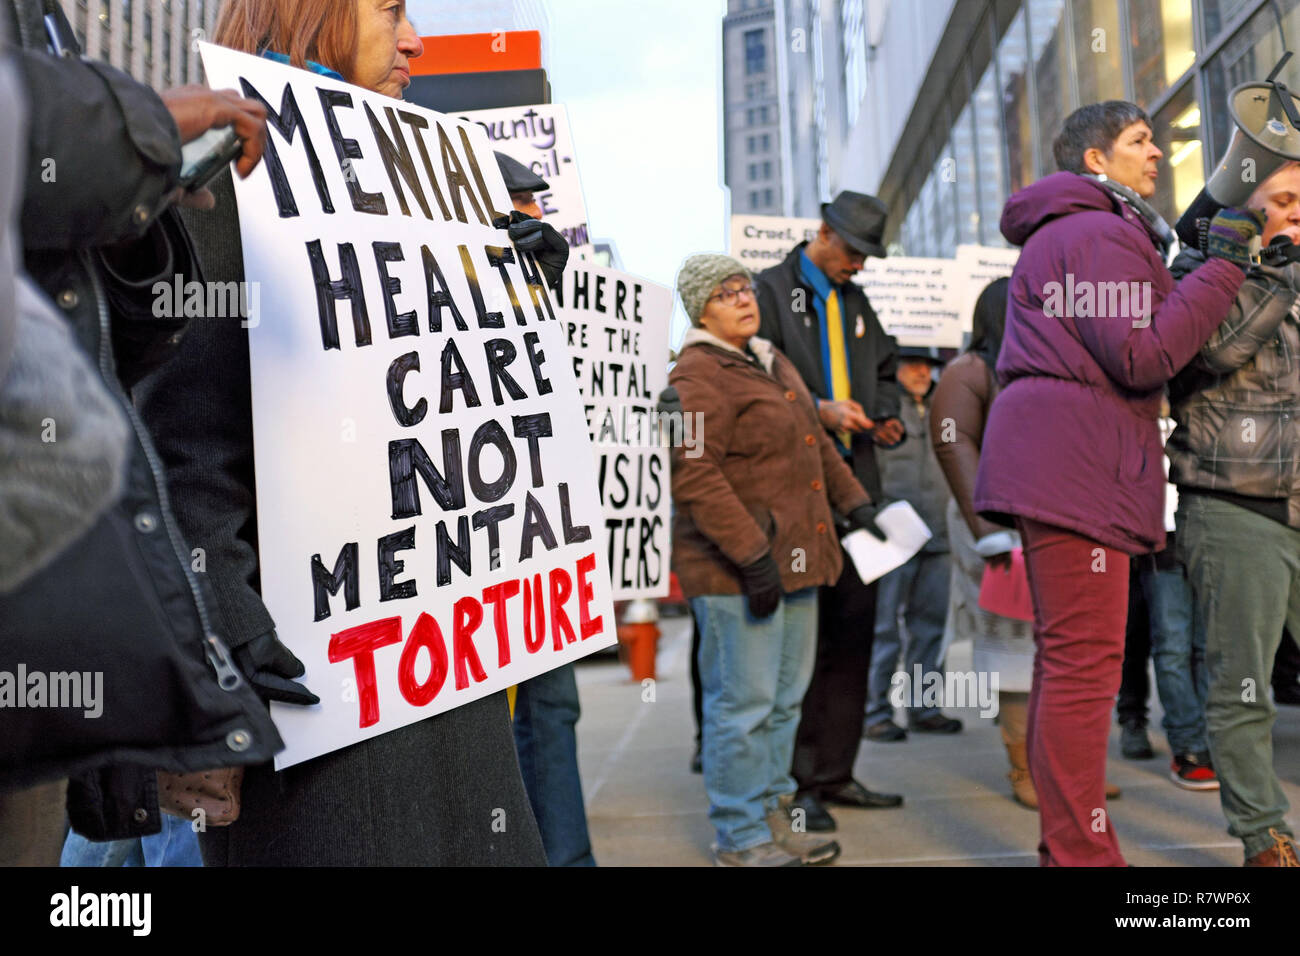 Cleveland, Ohio, USA, 11th Dec, 2018.  Protesters hold signs outside the Cuyahoga County Administration Building in downtown Cleveland, Ohio, USA prior to the council meeting addressing the inhumane conditions of the jails and the multiple deaths that have occurred to inmates over the previous six months.  Protesting address many of the issues identified by the federal inspection report by the U.S. Marshal service which found the conditions to be 'inhumane' and considered some of the worst jails in the United States. Credit: Mark Kanning/Alamy Live News Stock Photo